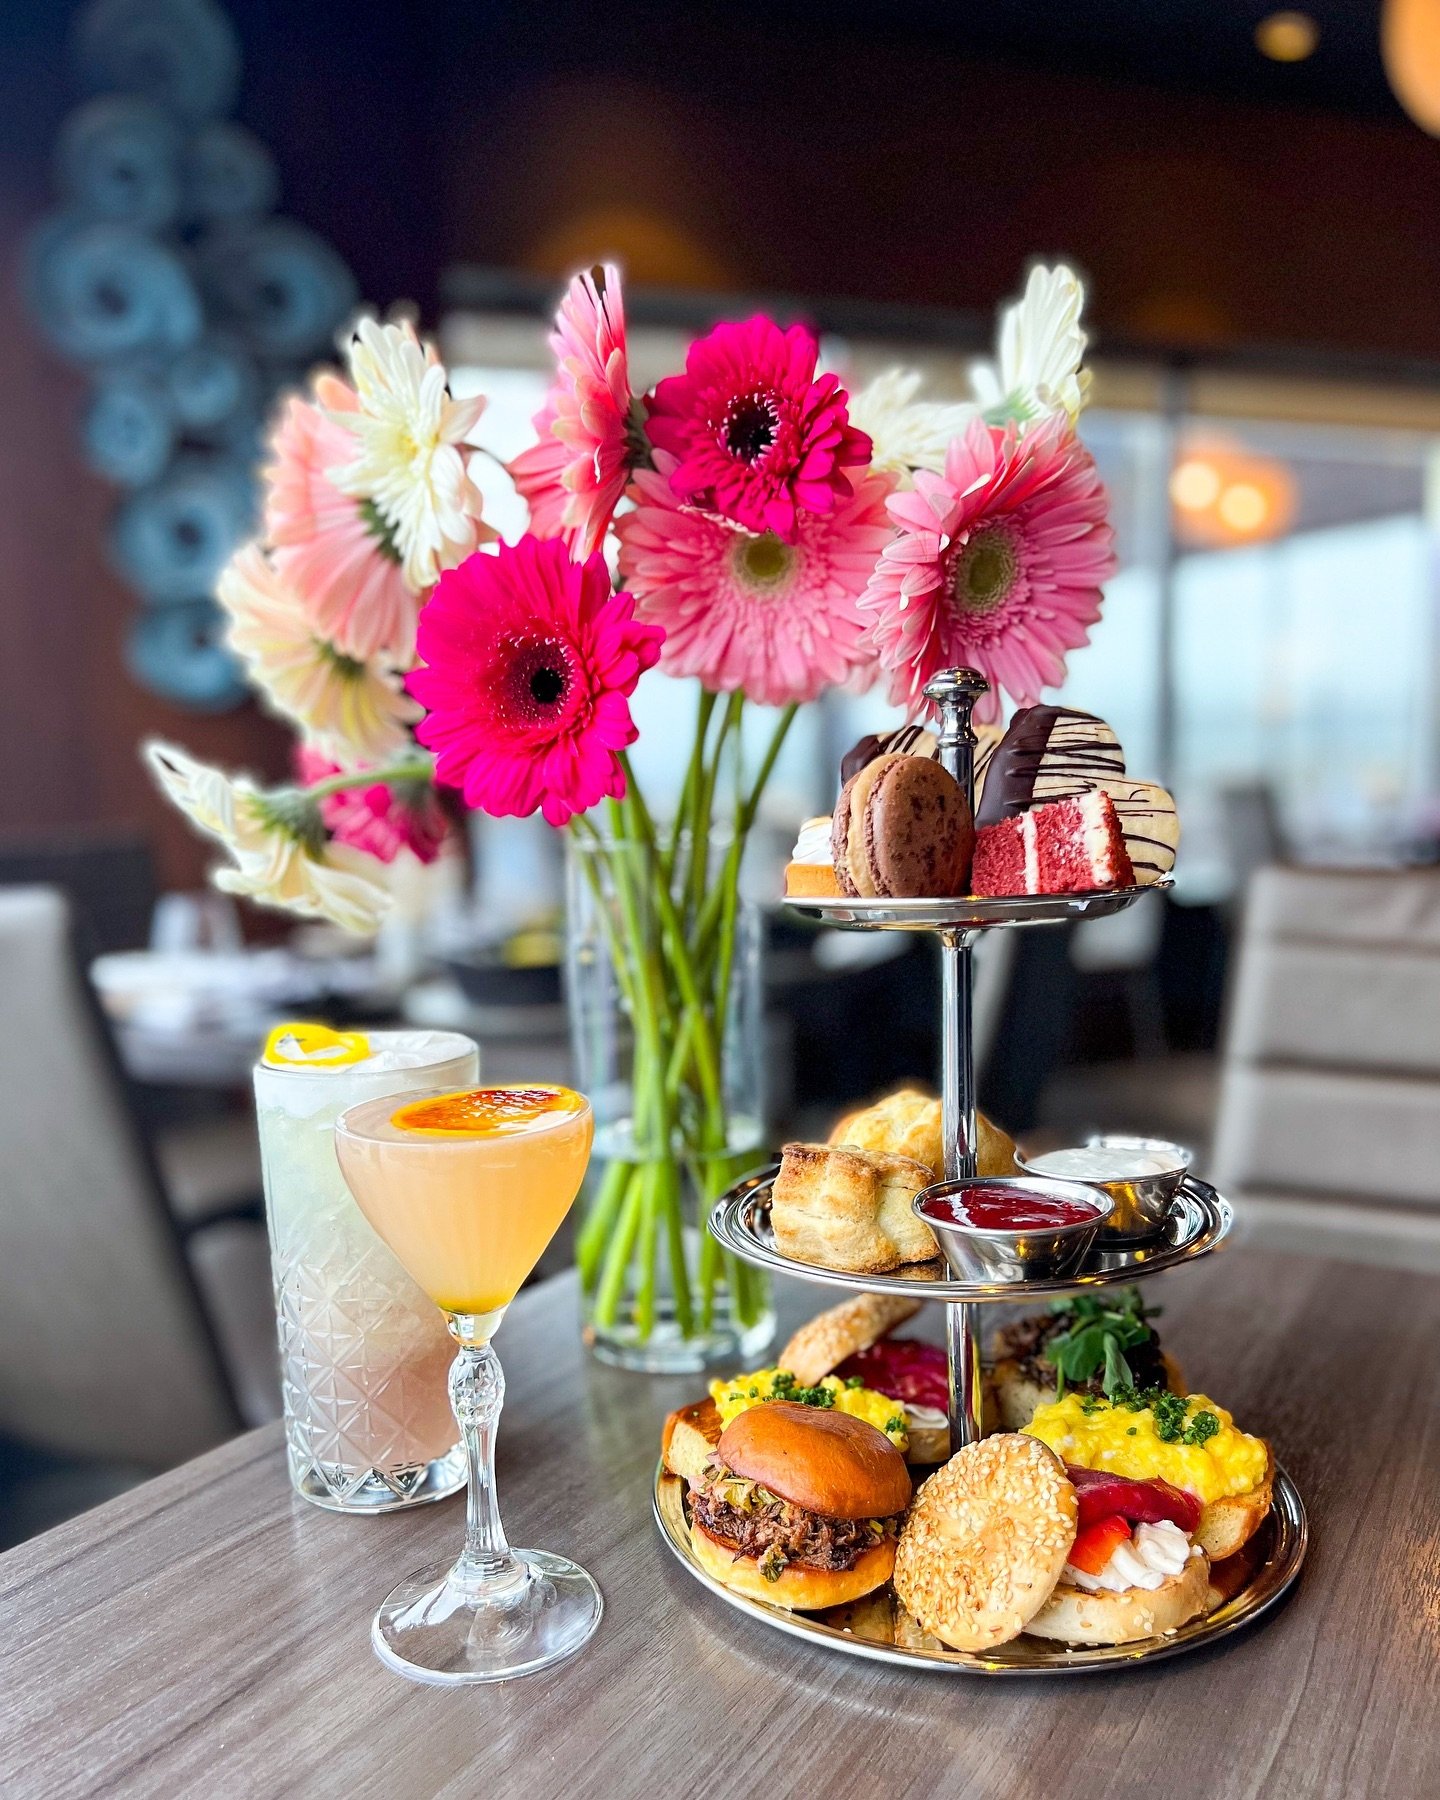 AquaTerra is the place to be this Mother&rsquo;s Day ✨💐

Celebrate the Mother figures in your life with a delectable Afternoon Tea overlooking Kingston&rsquo;s waterfront. Enjoy 3 tiers of sweet and savoury goodies and complement your bites with pre